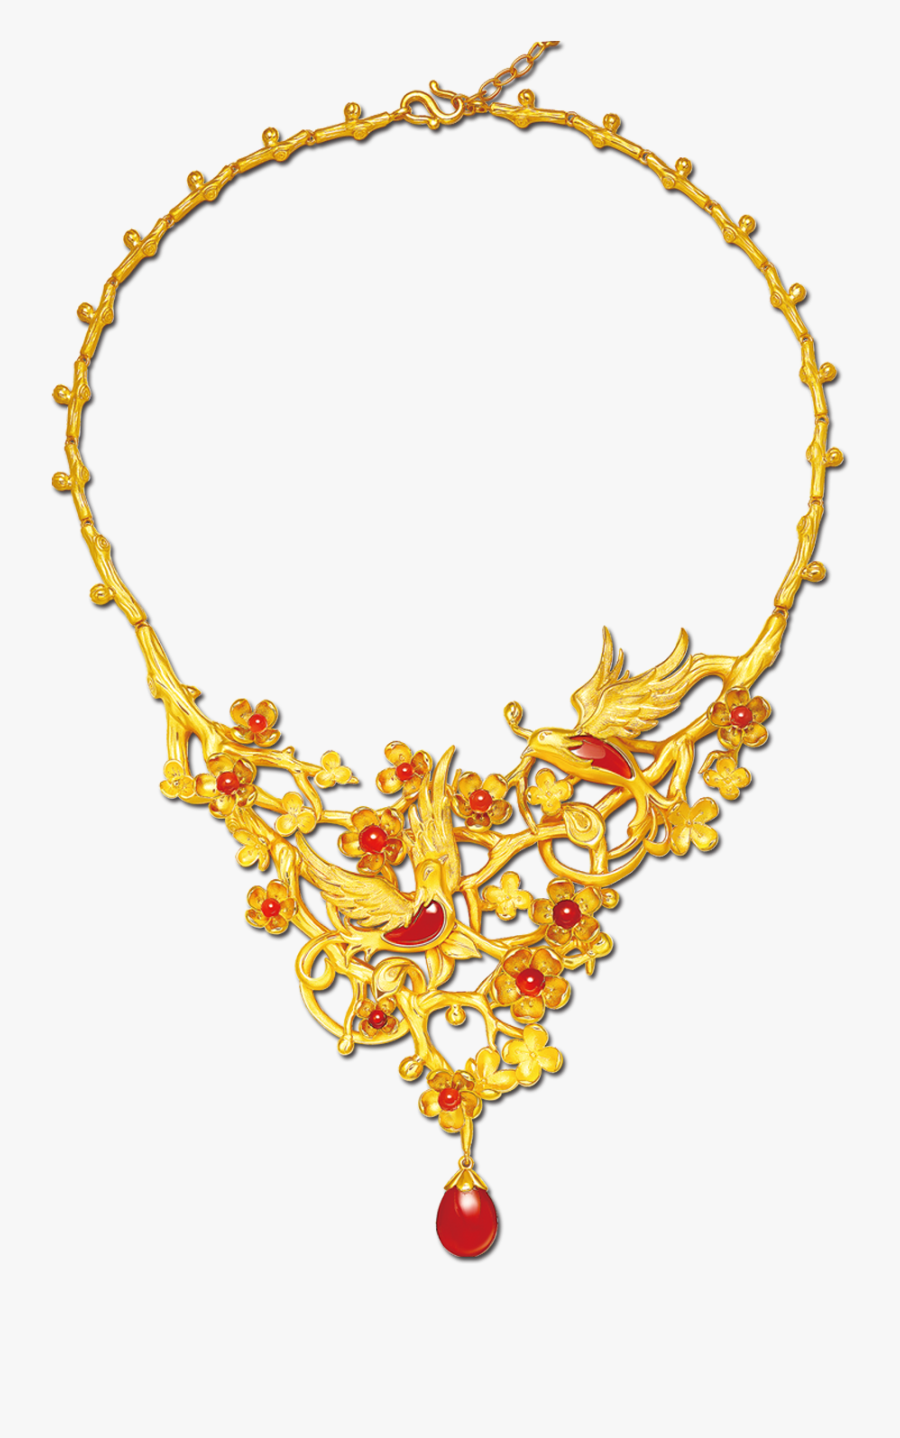 Necklace Gold Jewellery Fashion Accessory - Transparent Background Jewellery Png, Transparent Clipart